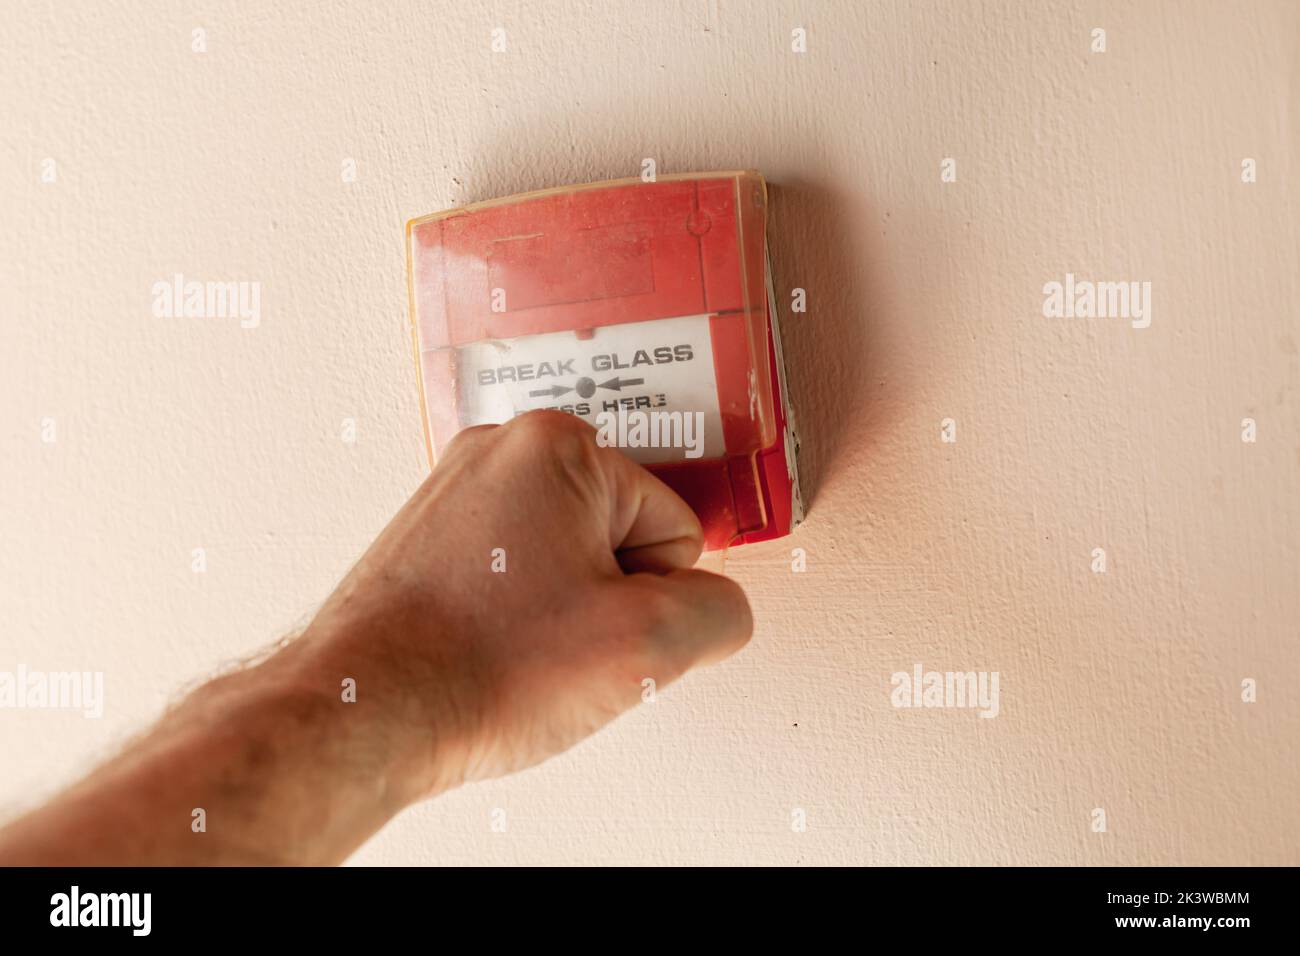 Male fist breaks plastic cover of red fire alarm button, close-up photo with selective focus Stock Photo